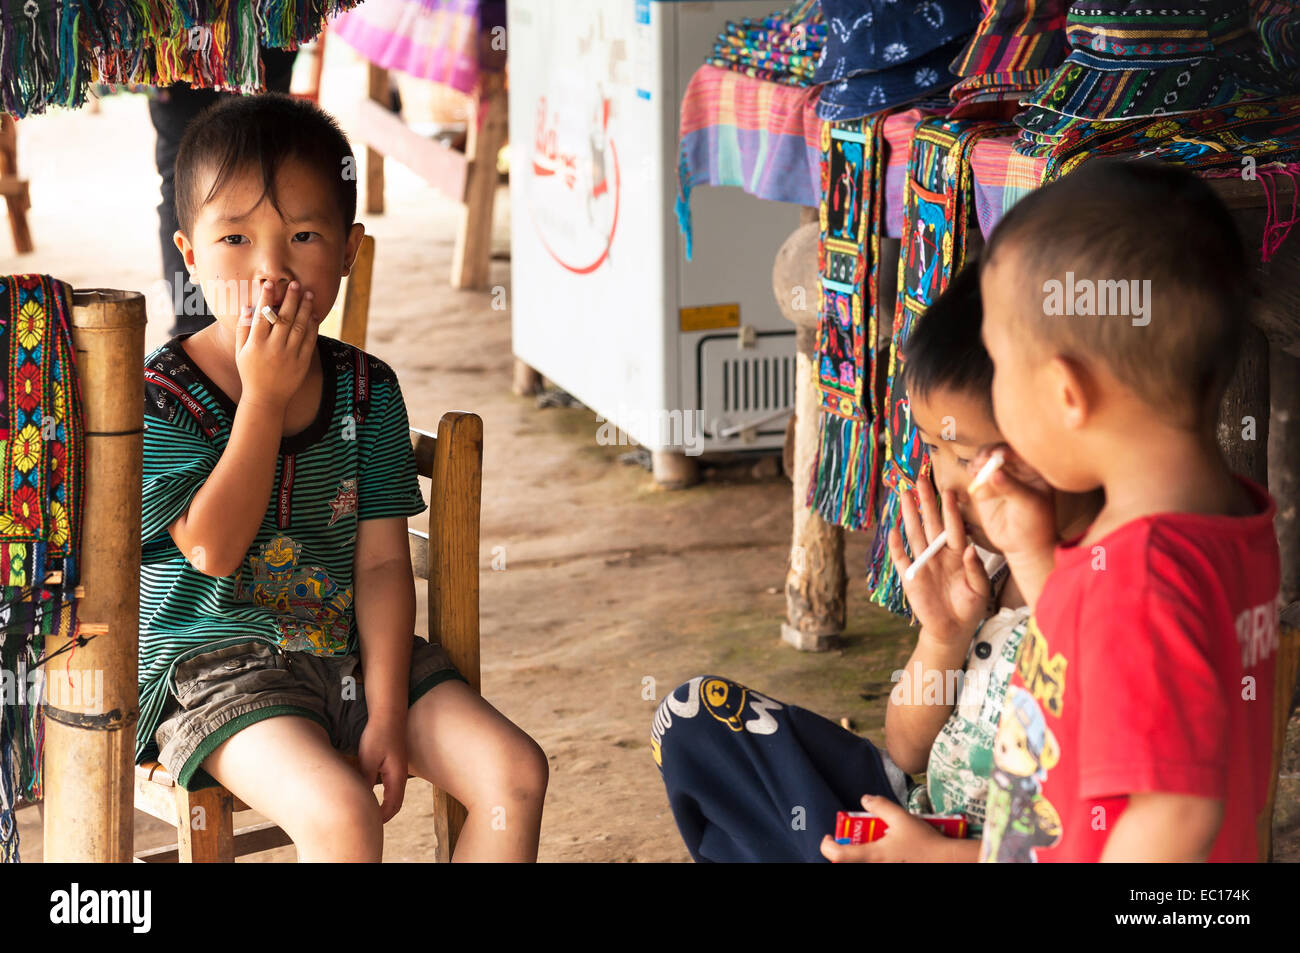 Young Chinese boys pretending to smoke with candy sticks in Guangxi Province, China Stock Photo